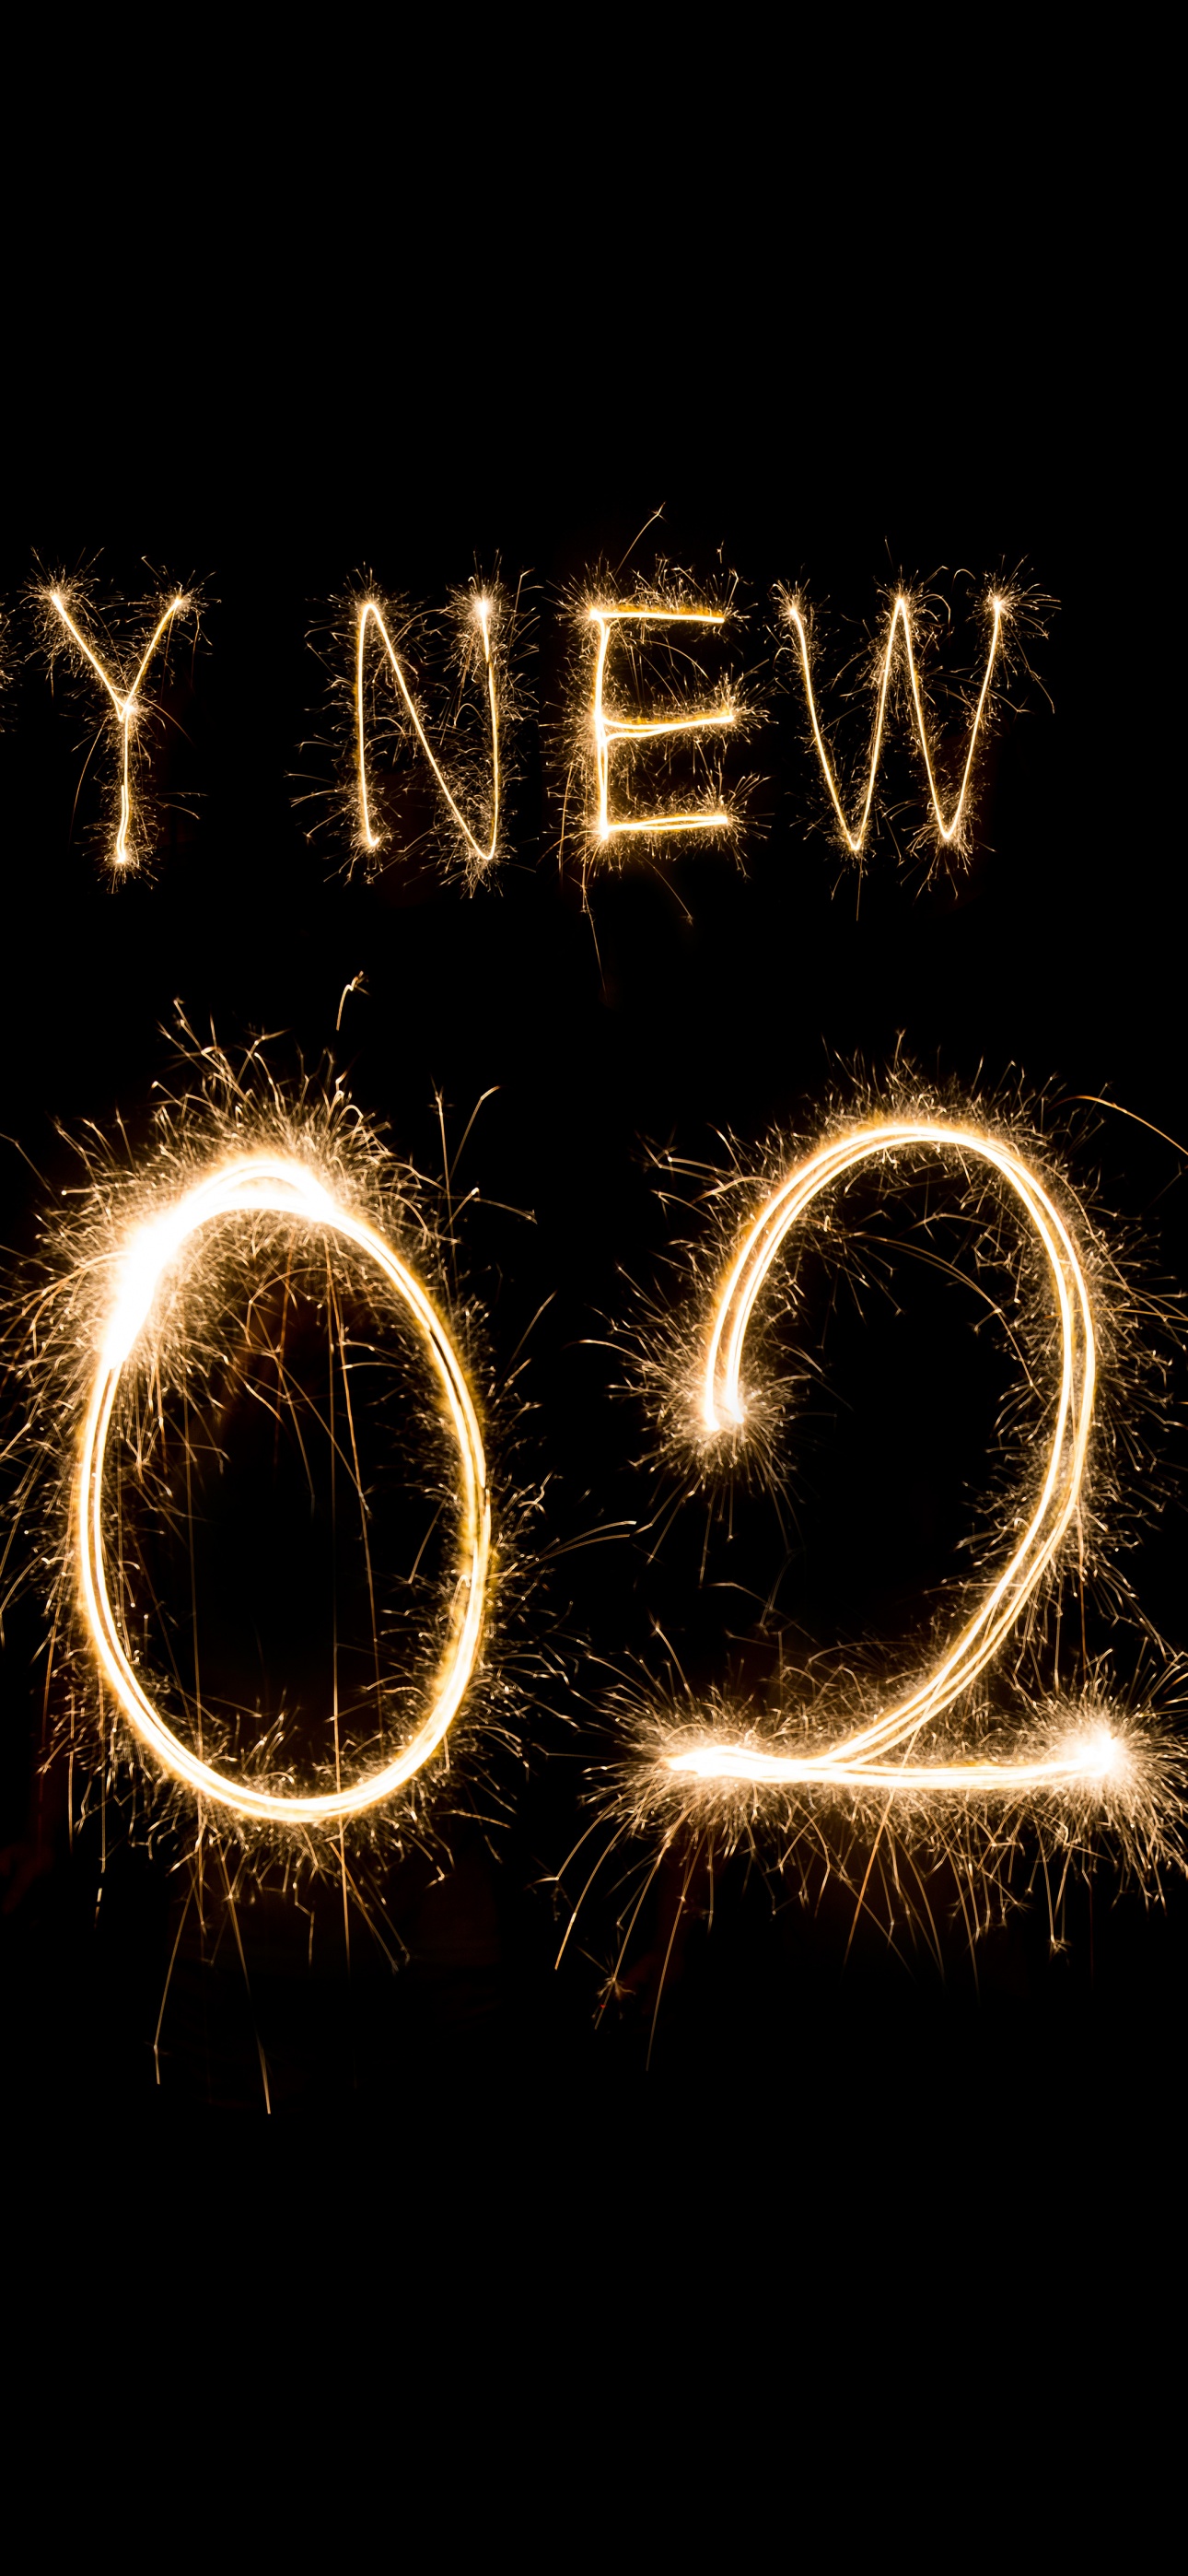 40 New Years Wallpaper Designs To Download Free 